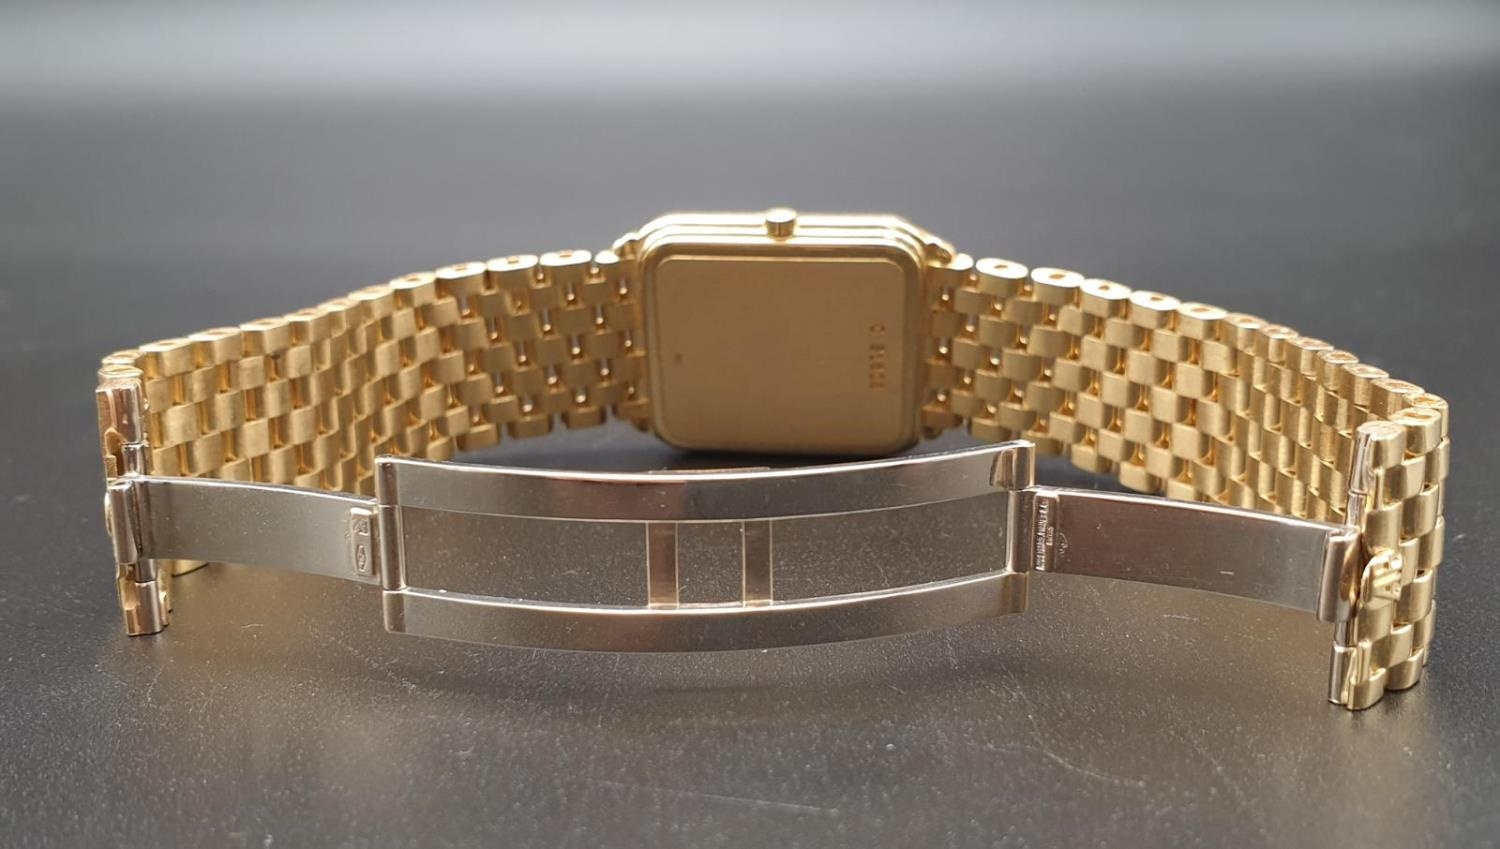 AUDEMARS PIGUET 18K GOLD WATCH WITH GOLD STRAP, SQUARE FACE AND MANUAL MOVEMENT. 26MM - Image 8 of 12